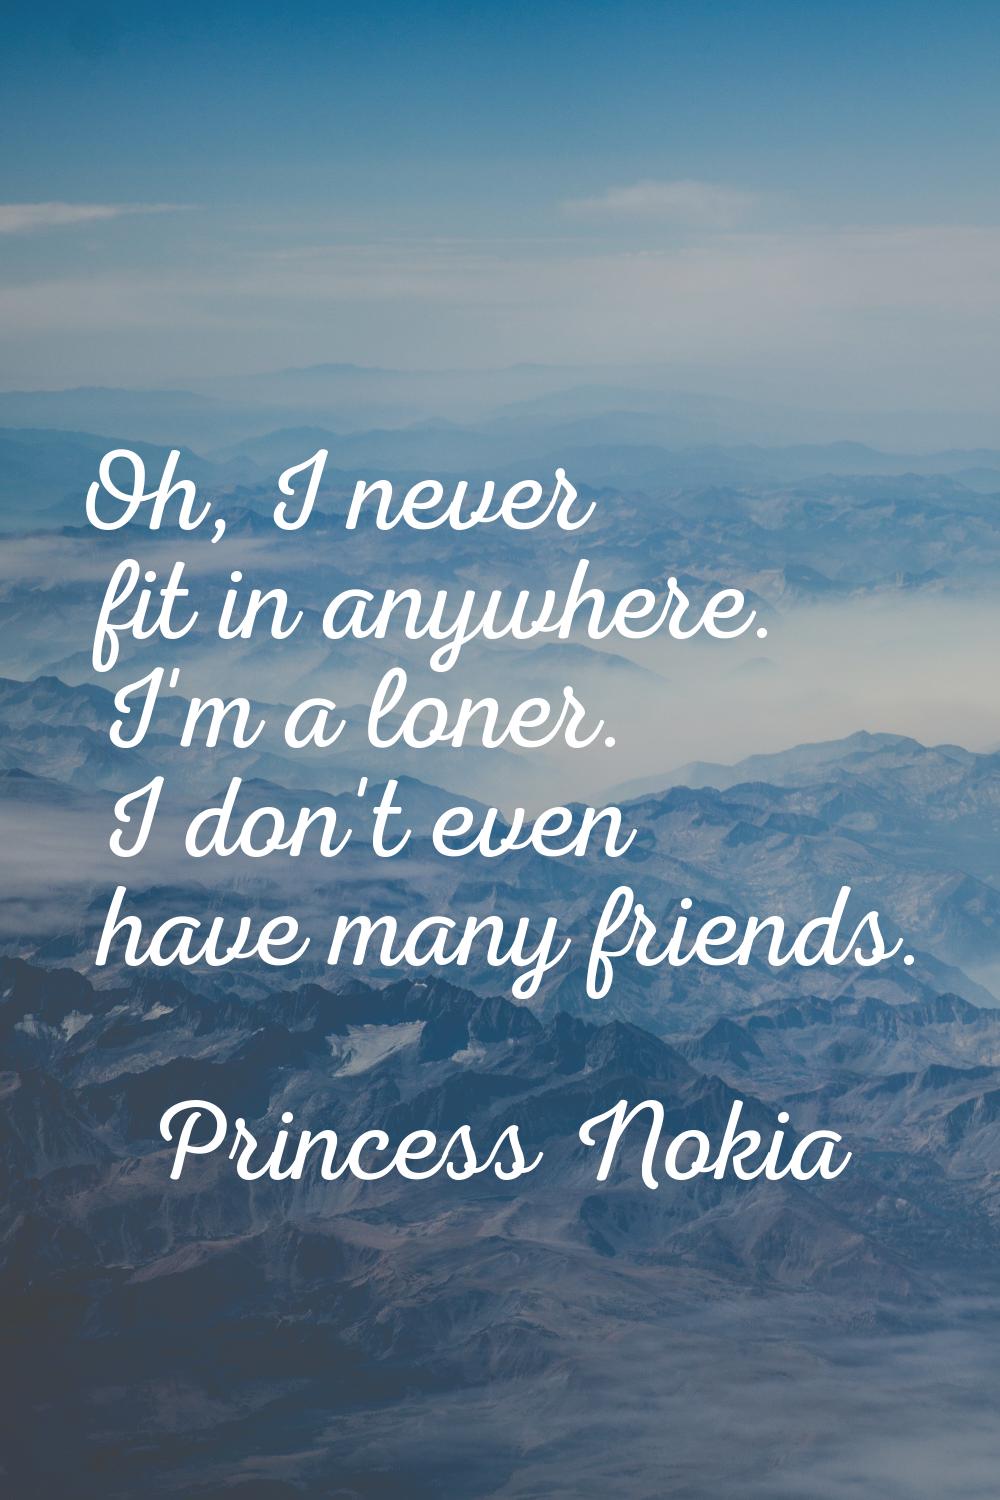 Oh, I never fit in anywhere. I'm a loner. I don't even have many friends.